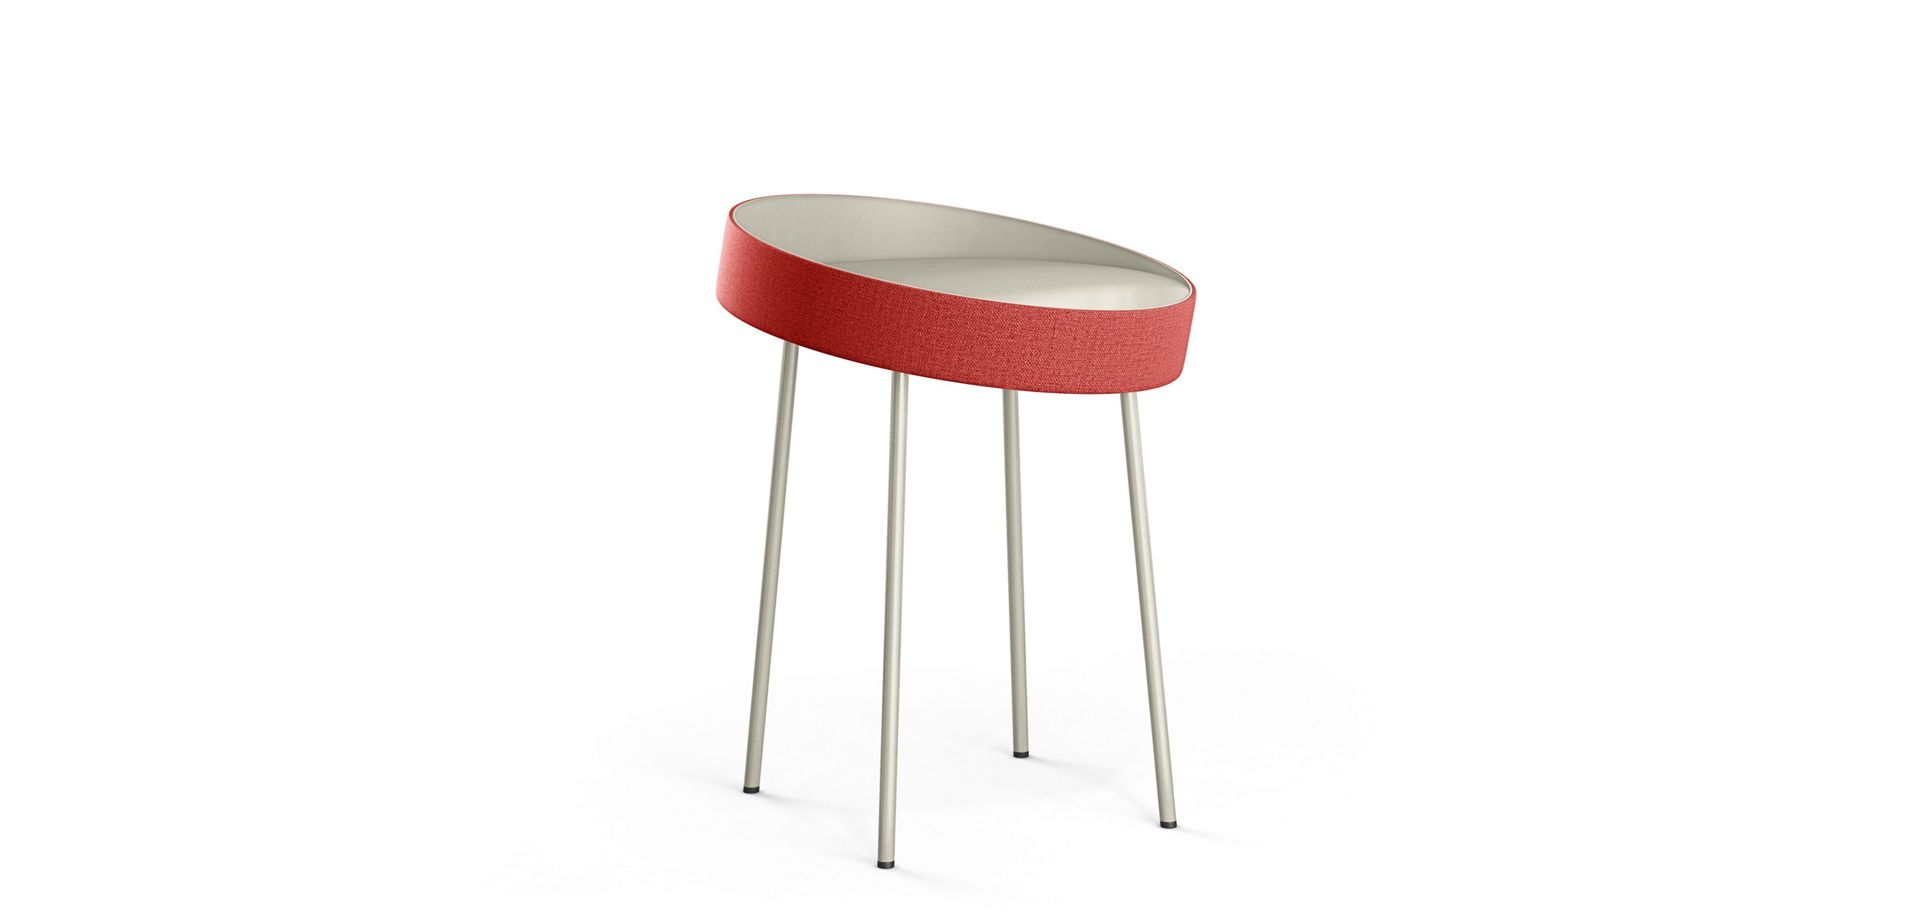 COIN Table basse ronde By Roche Bobois